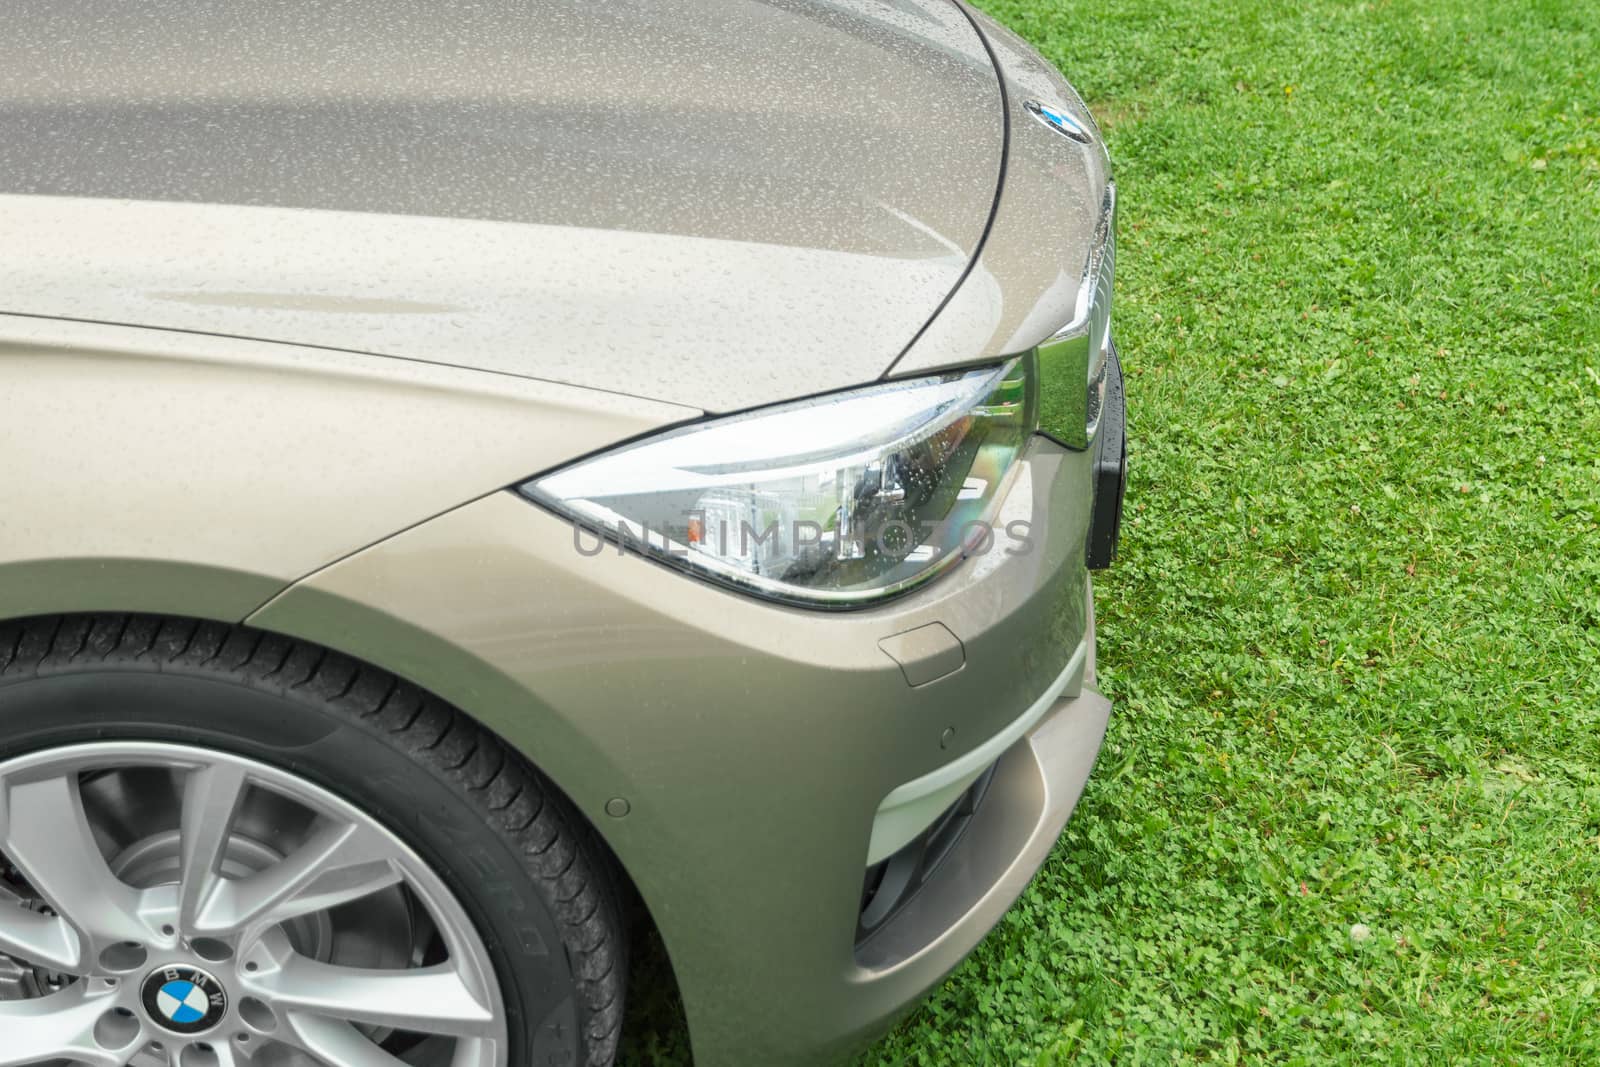 MUNICH, GERMANY - AUGUST 9, 2014: New model of BMW prestigious business car on fresh green grass wet after rain. Close-up details.